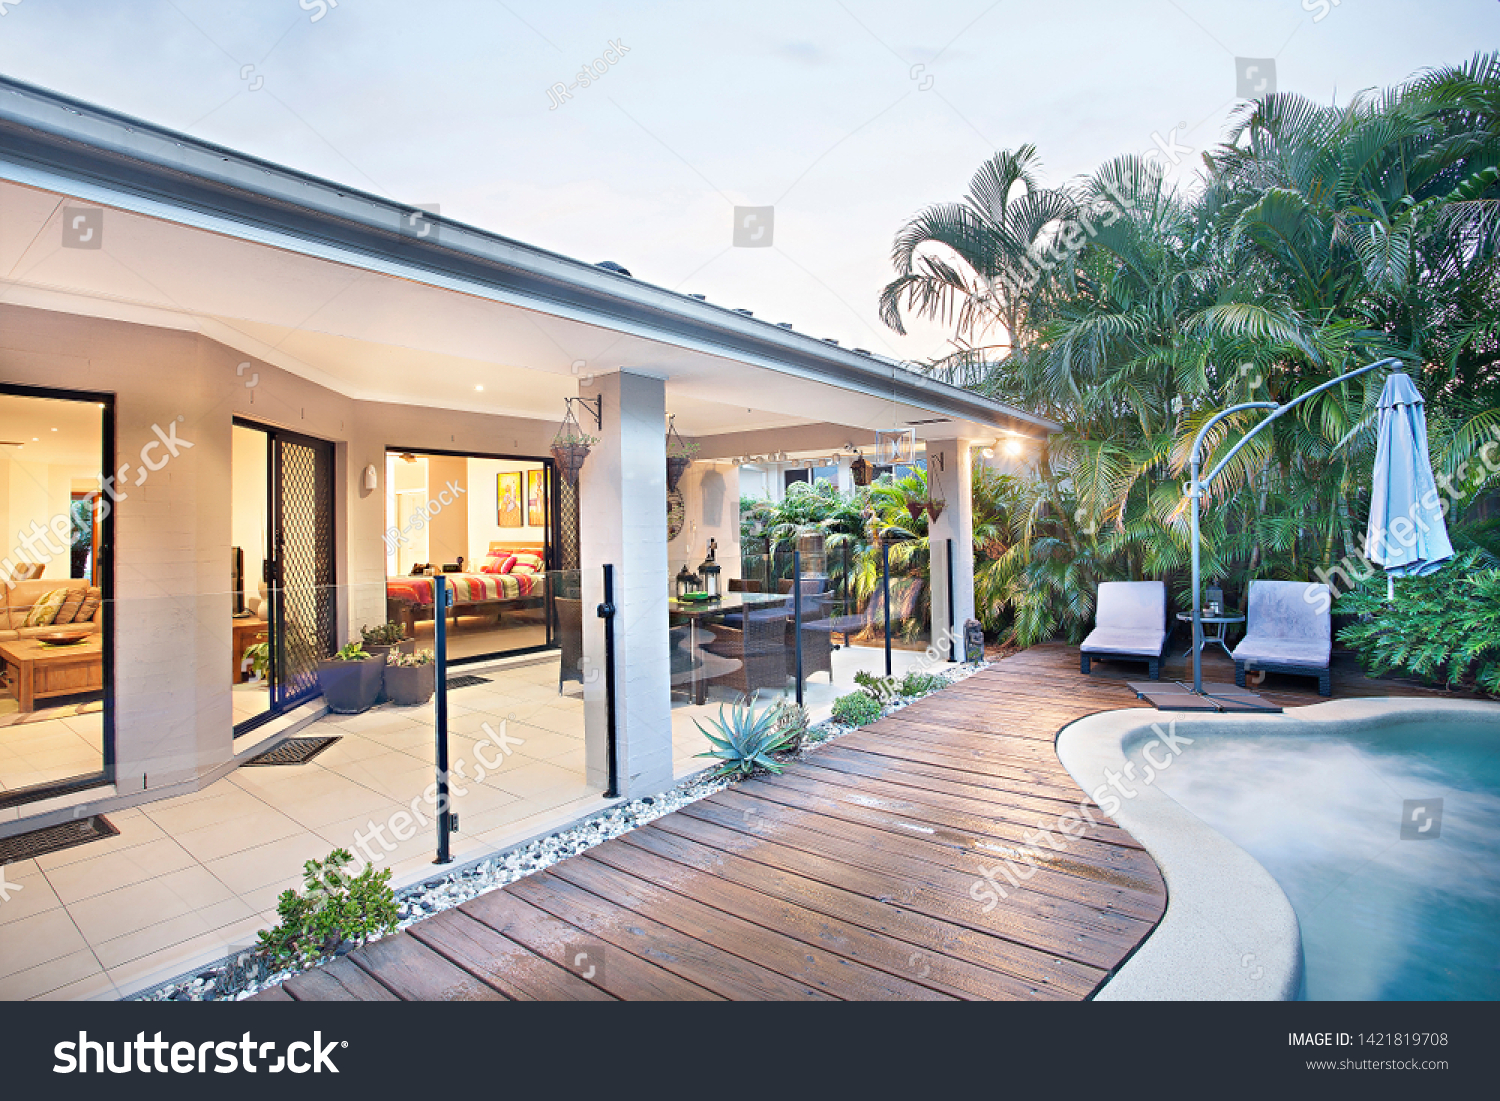 House Garden Swimming Pool Plants Natural Stock Photo Edit Now